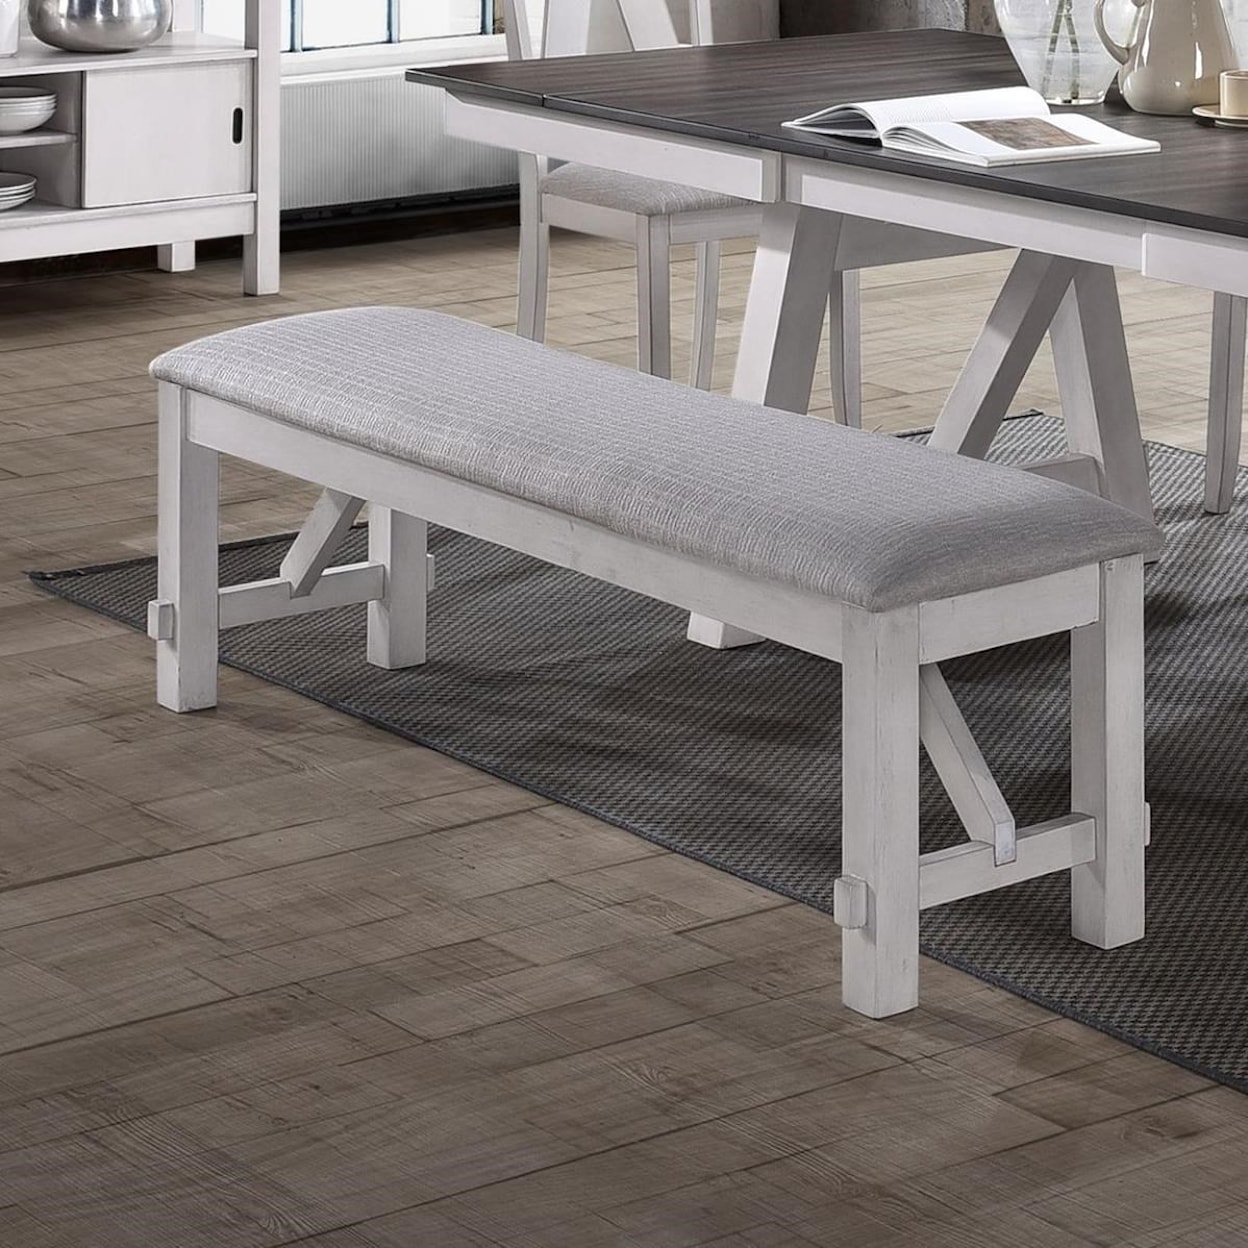 New Classic Furniture Maisie Bench